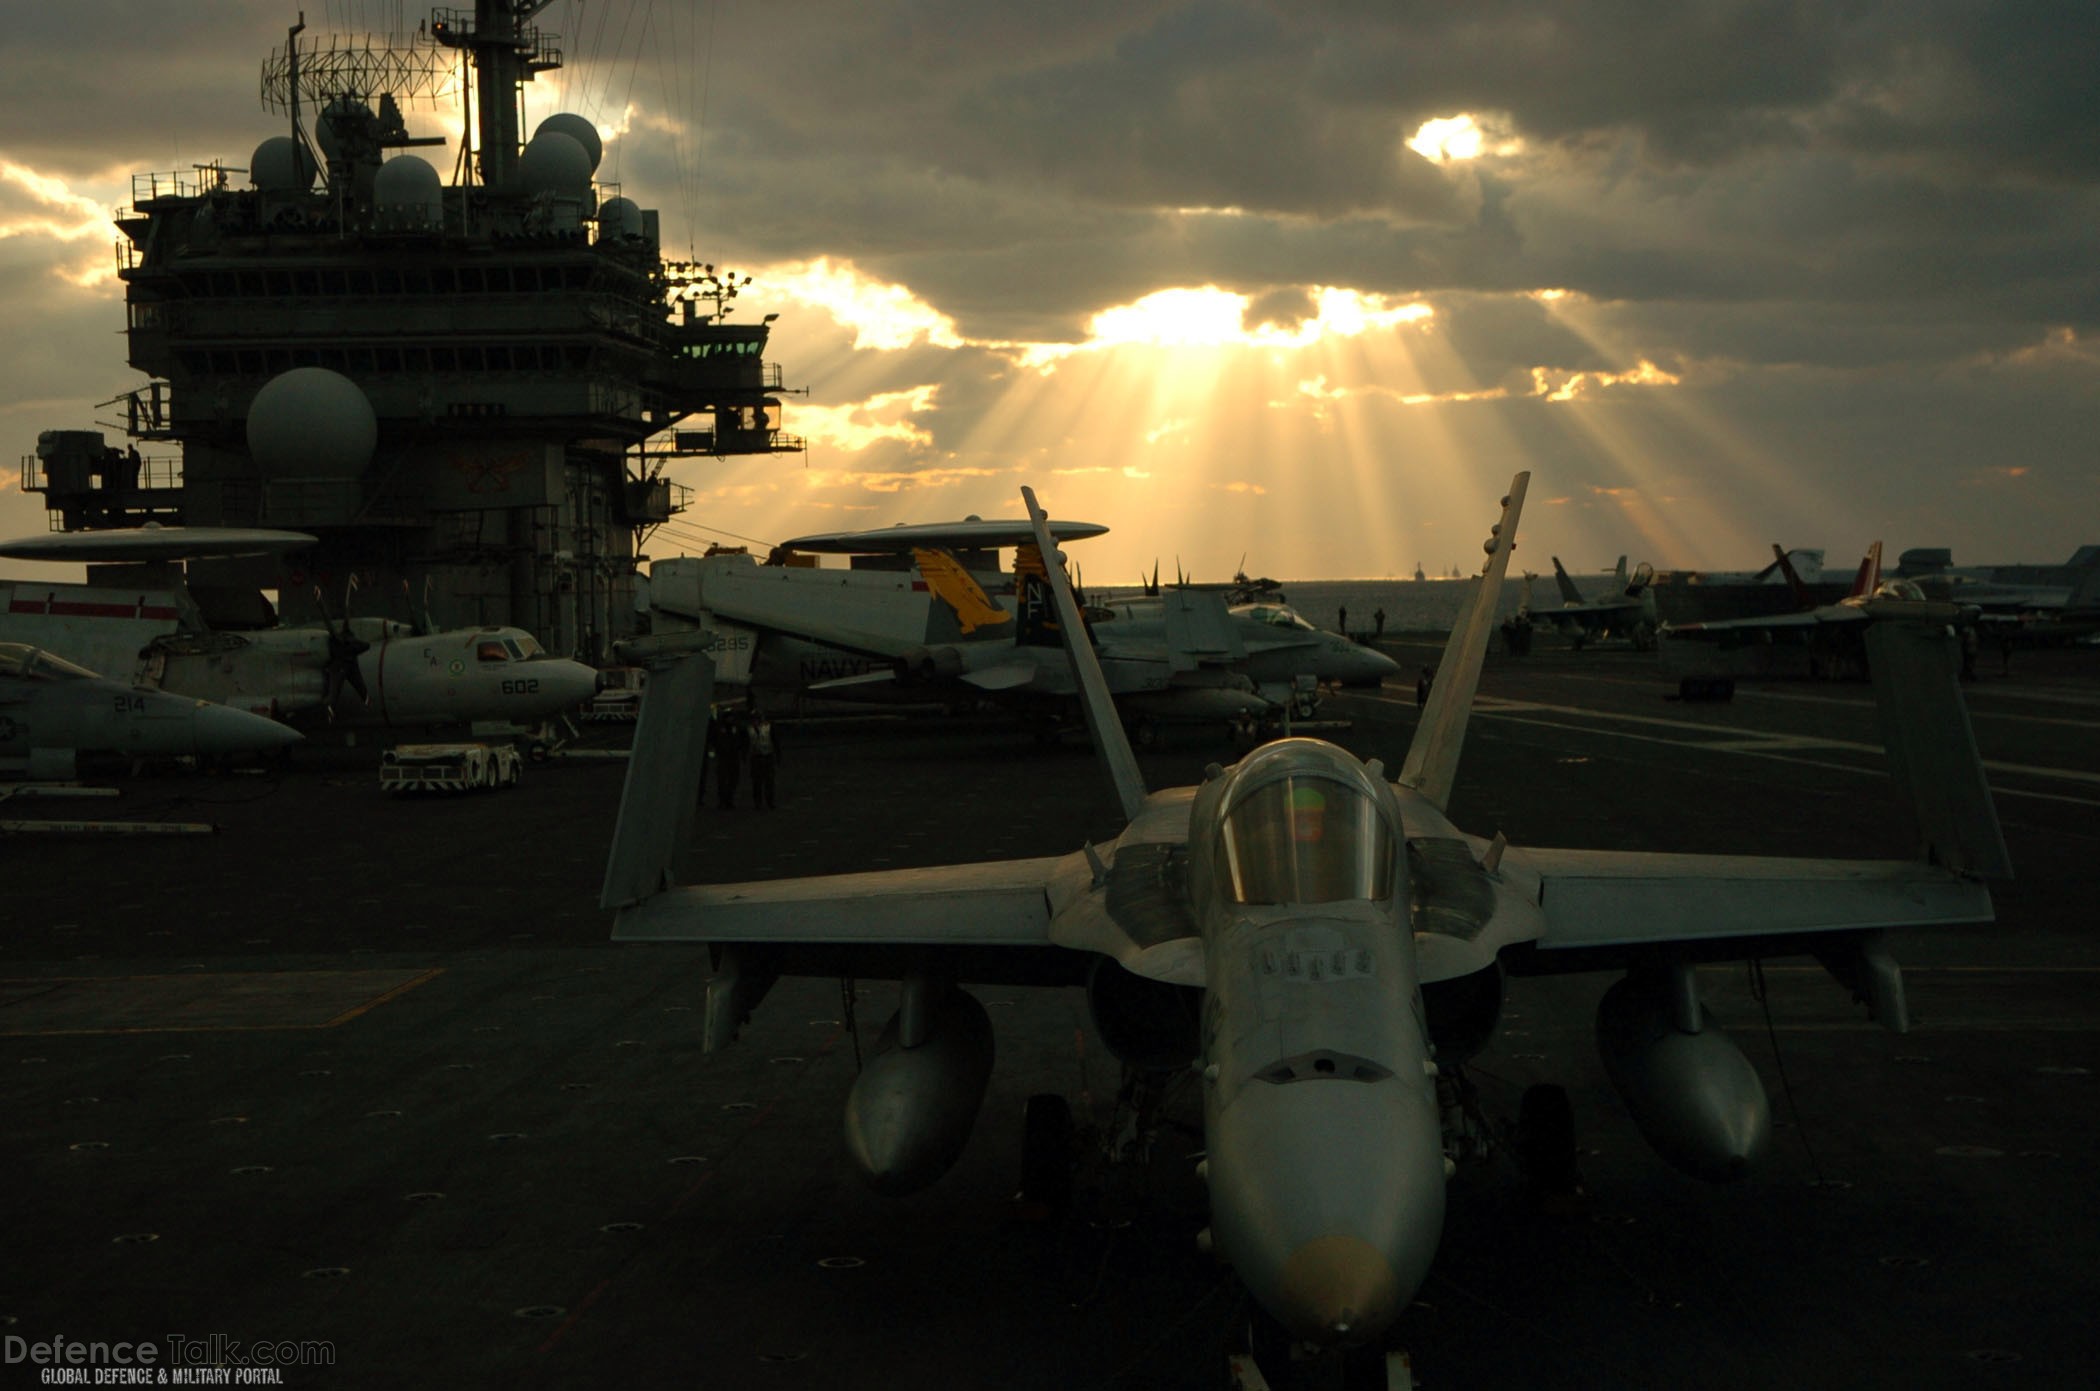 F-18 and Sunset on USS Kitty Hawk (CV 63) Aircraft Carrier